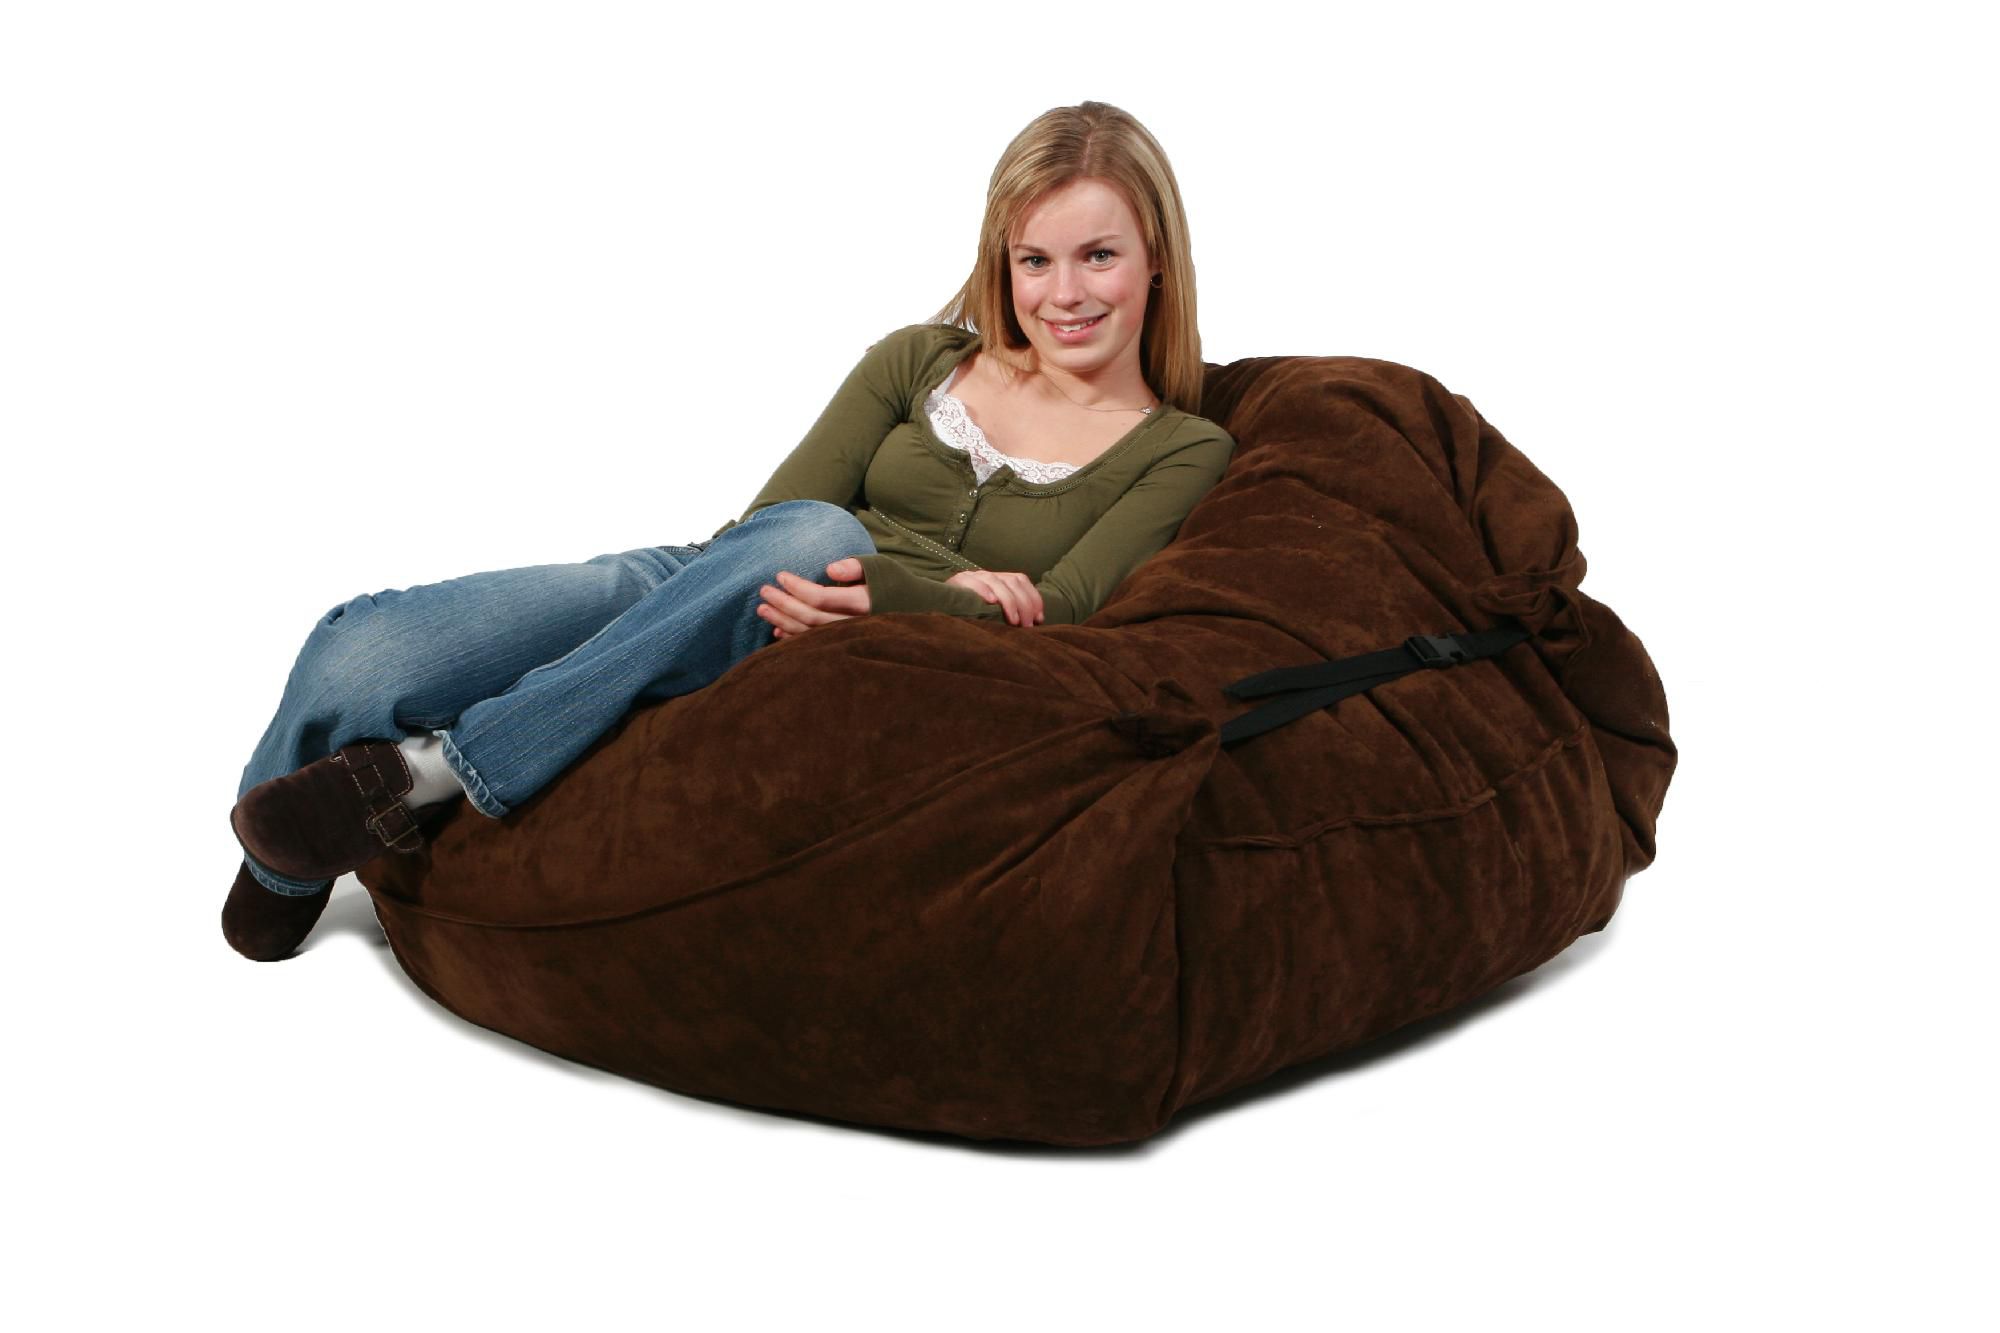 Comfort Research Relax Fuf Lounger